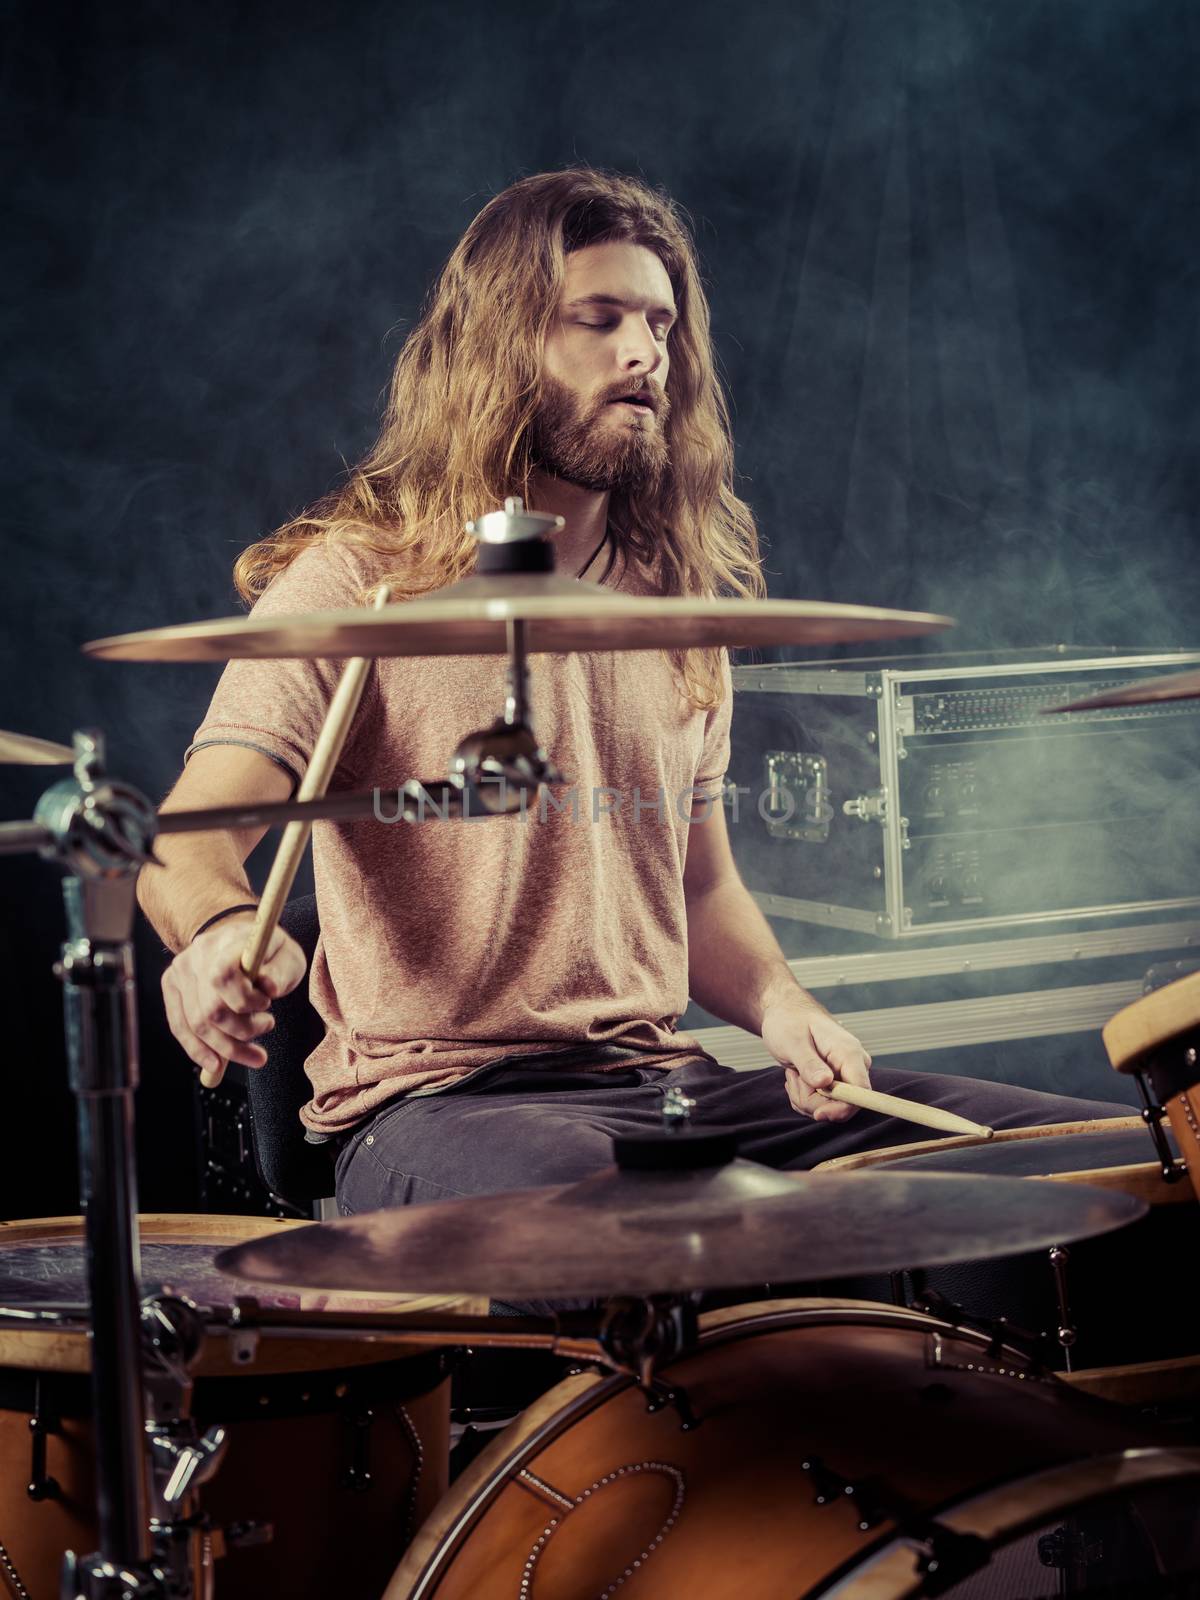 Young man with long hair playing drums by sumners